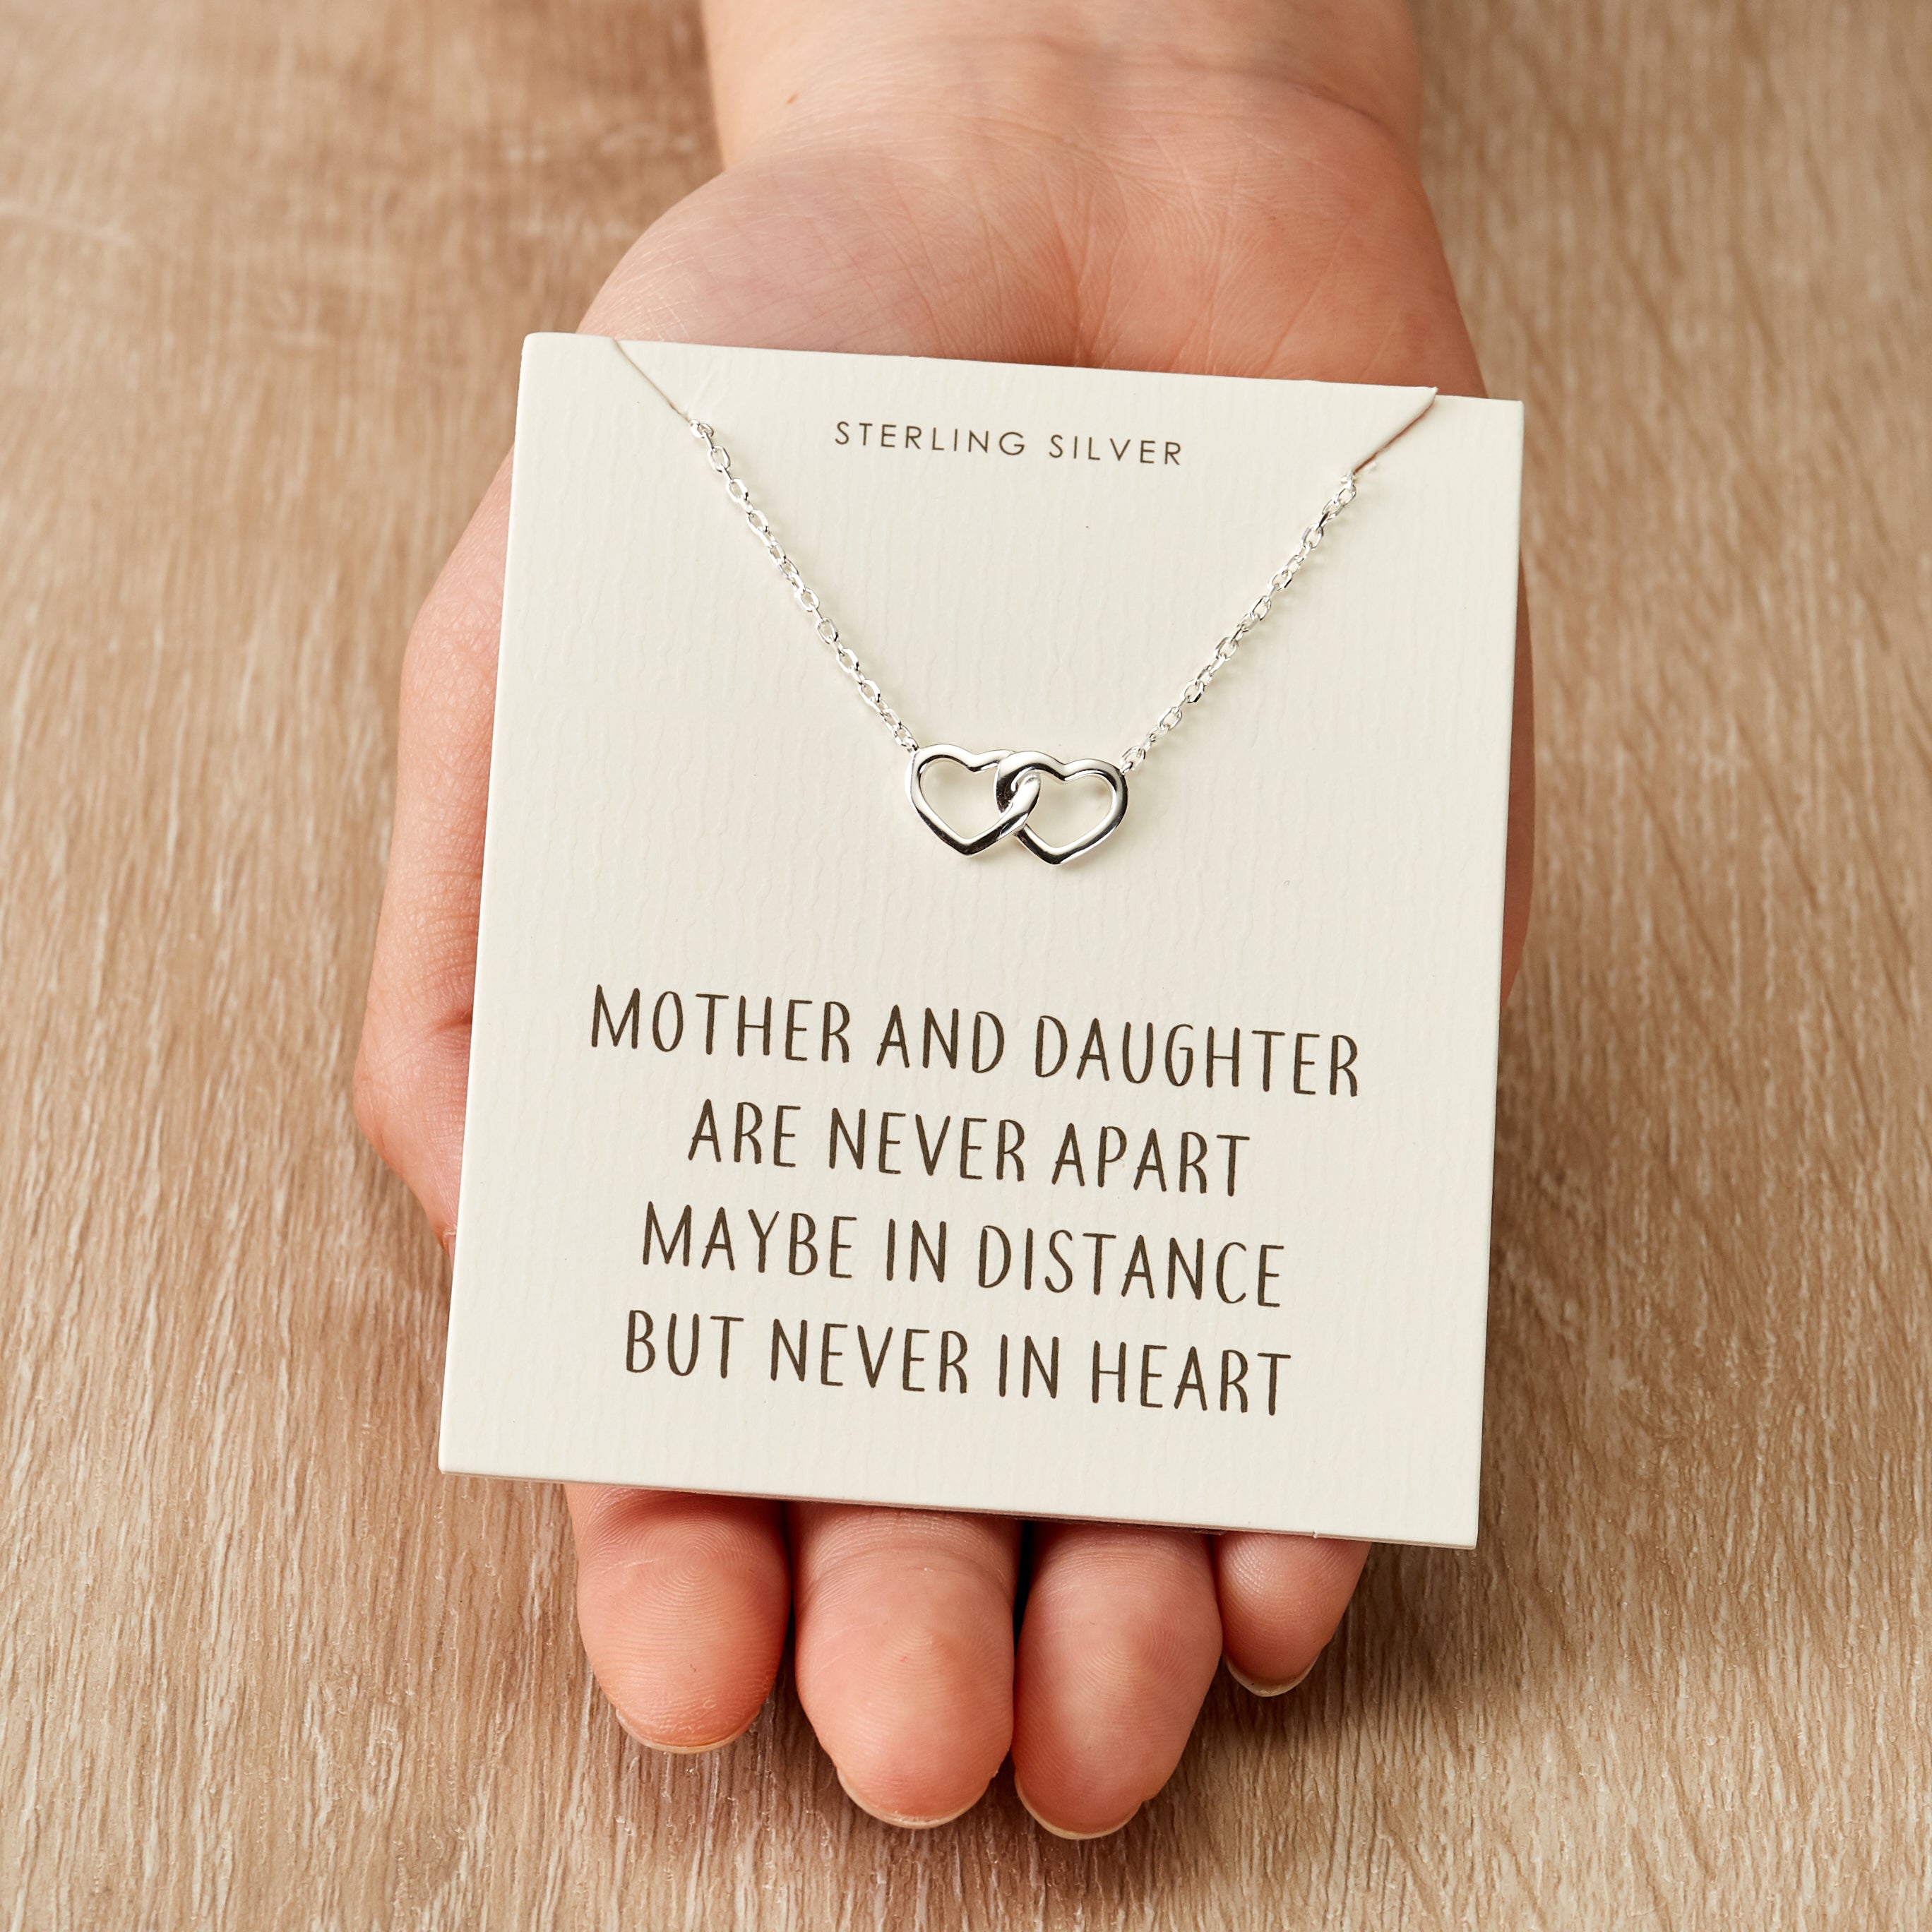 20678 SterlingSilverMotherandDaughterQuoteHeartLinkNecklace held2